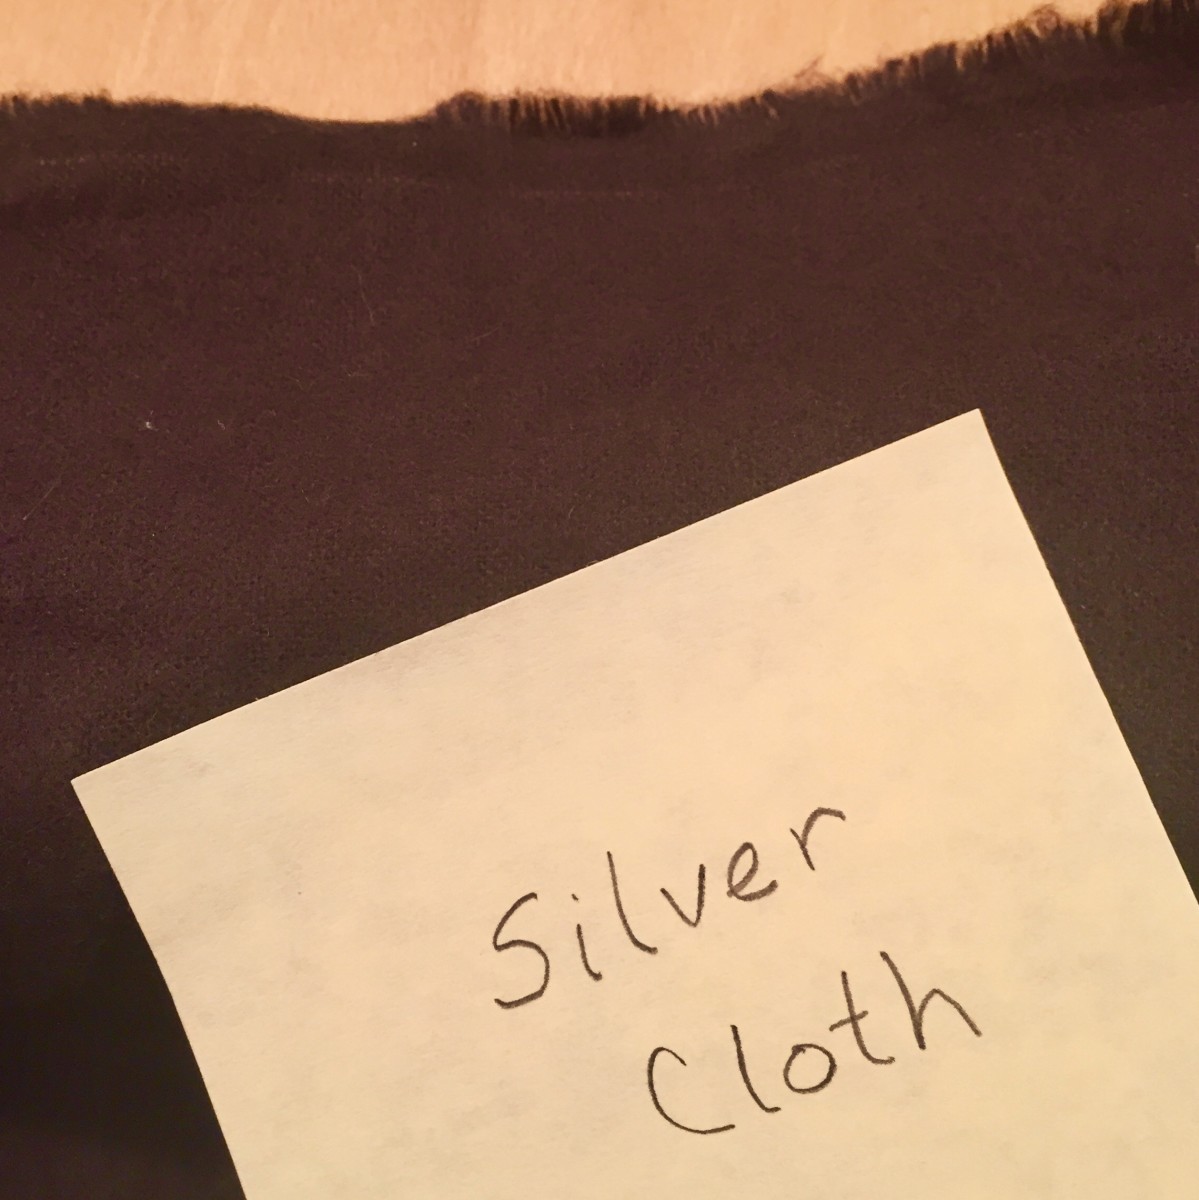 Do not ever wash, dry clean, iron, or put silver cloth in the dryer.